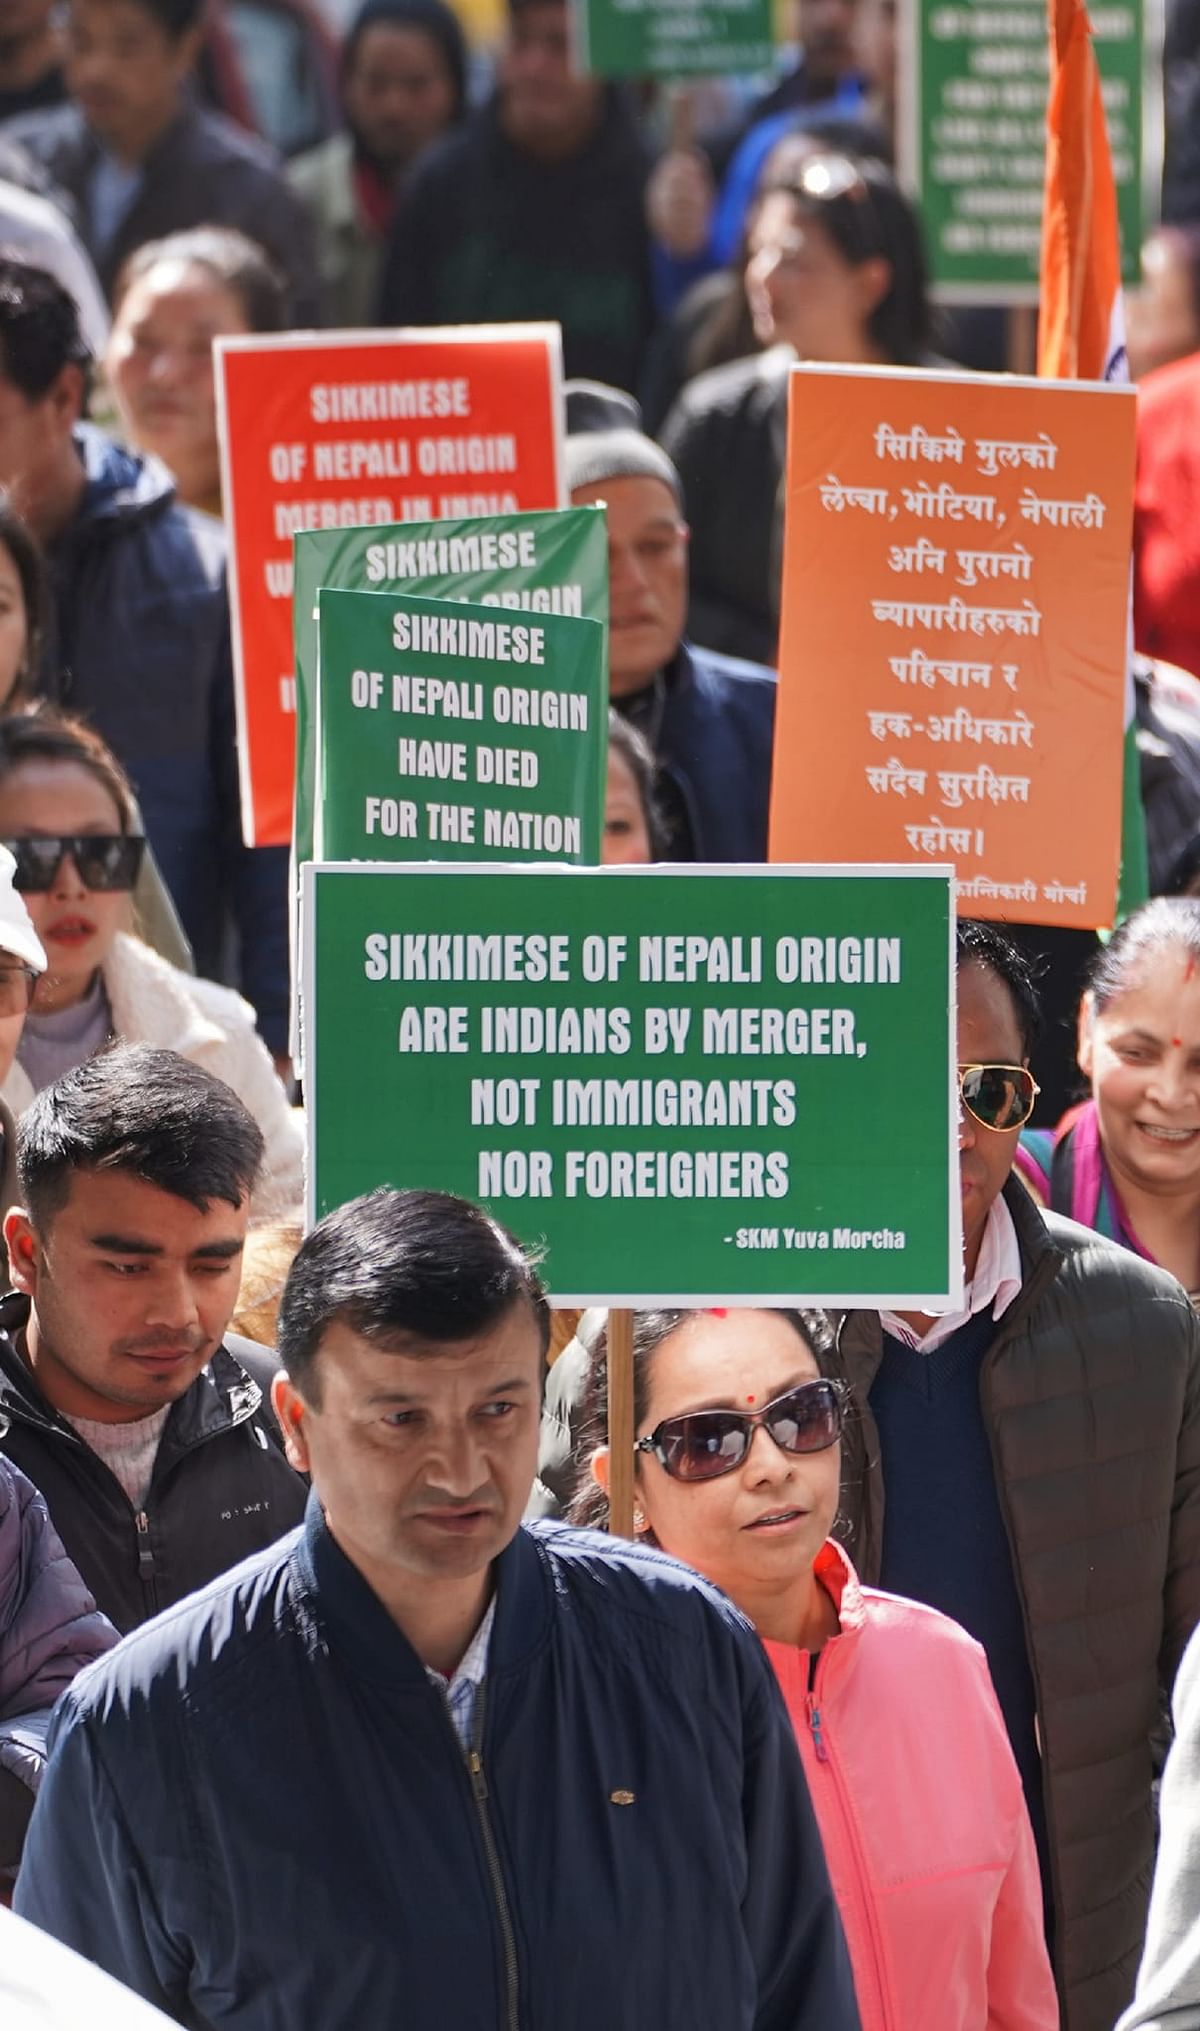 The court referred to Sikkimese Nepalis as people of 'foreign origin', sparking a row in the state.